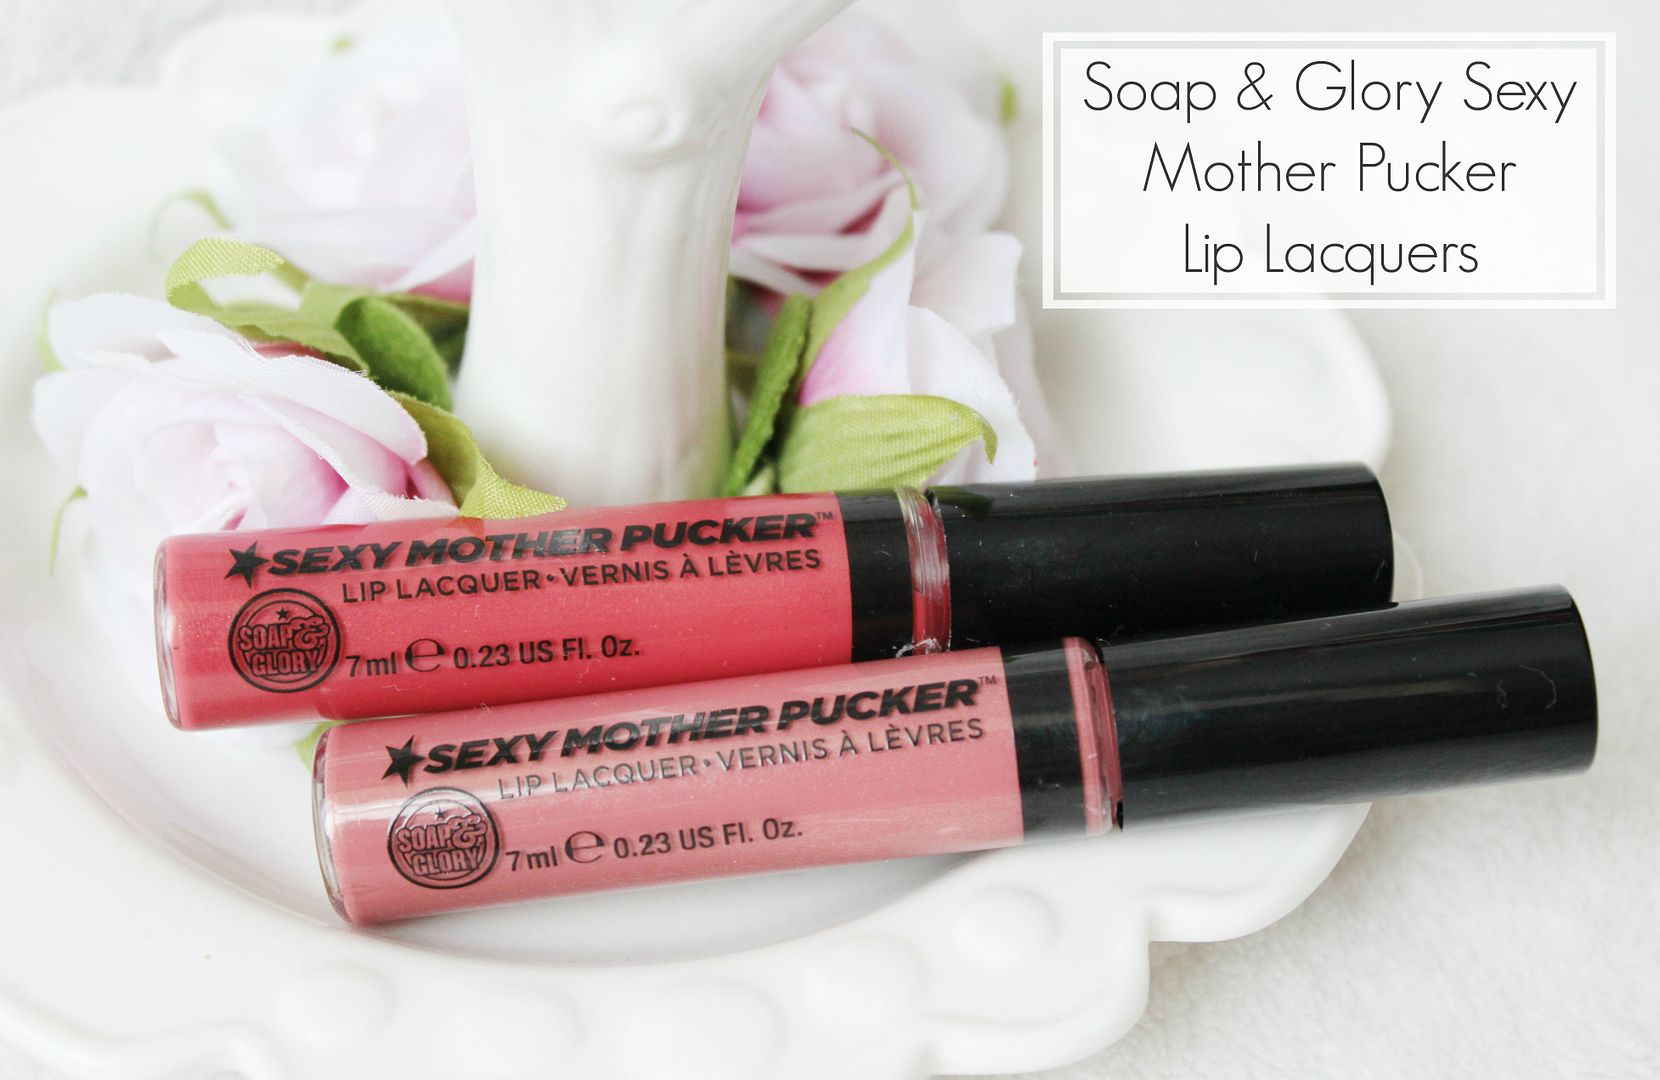 Soap And Glory Sexy Mother Pucker Lip Lacquers What Cha Ma Coral Charm Offensive Bold Spring Lips Review Belle Amie UK Beauty Fashion Lifestyle Blog